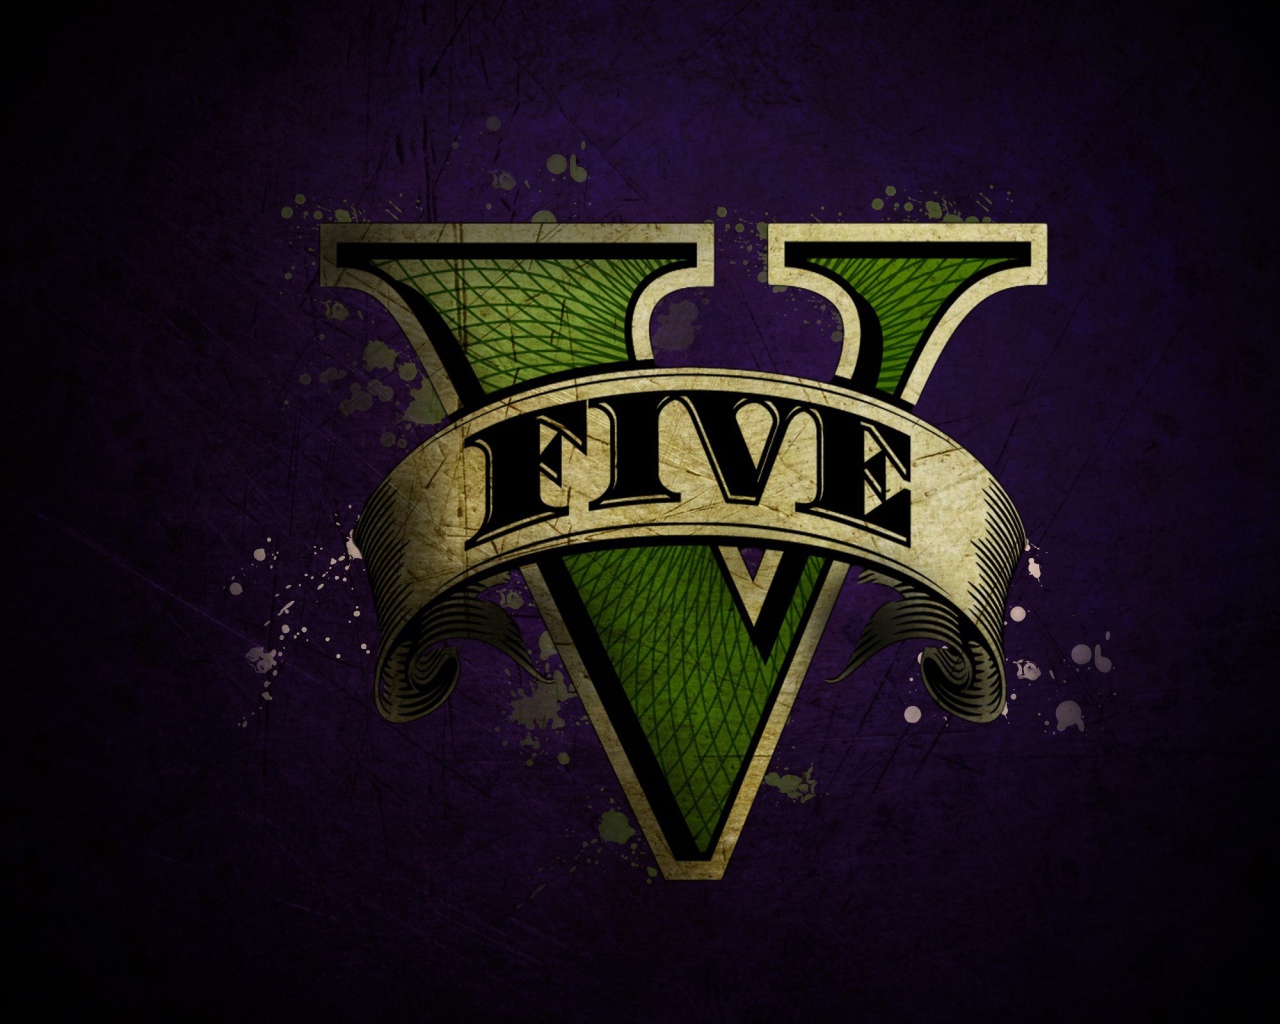 Logo game Grand Theft Auto V on a purple background